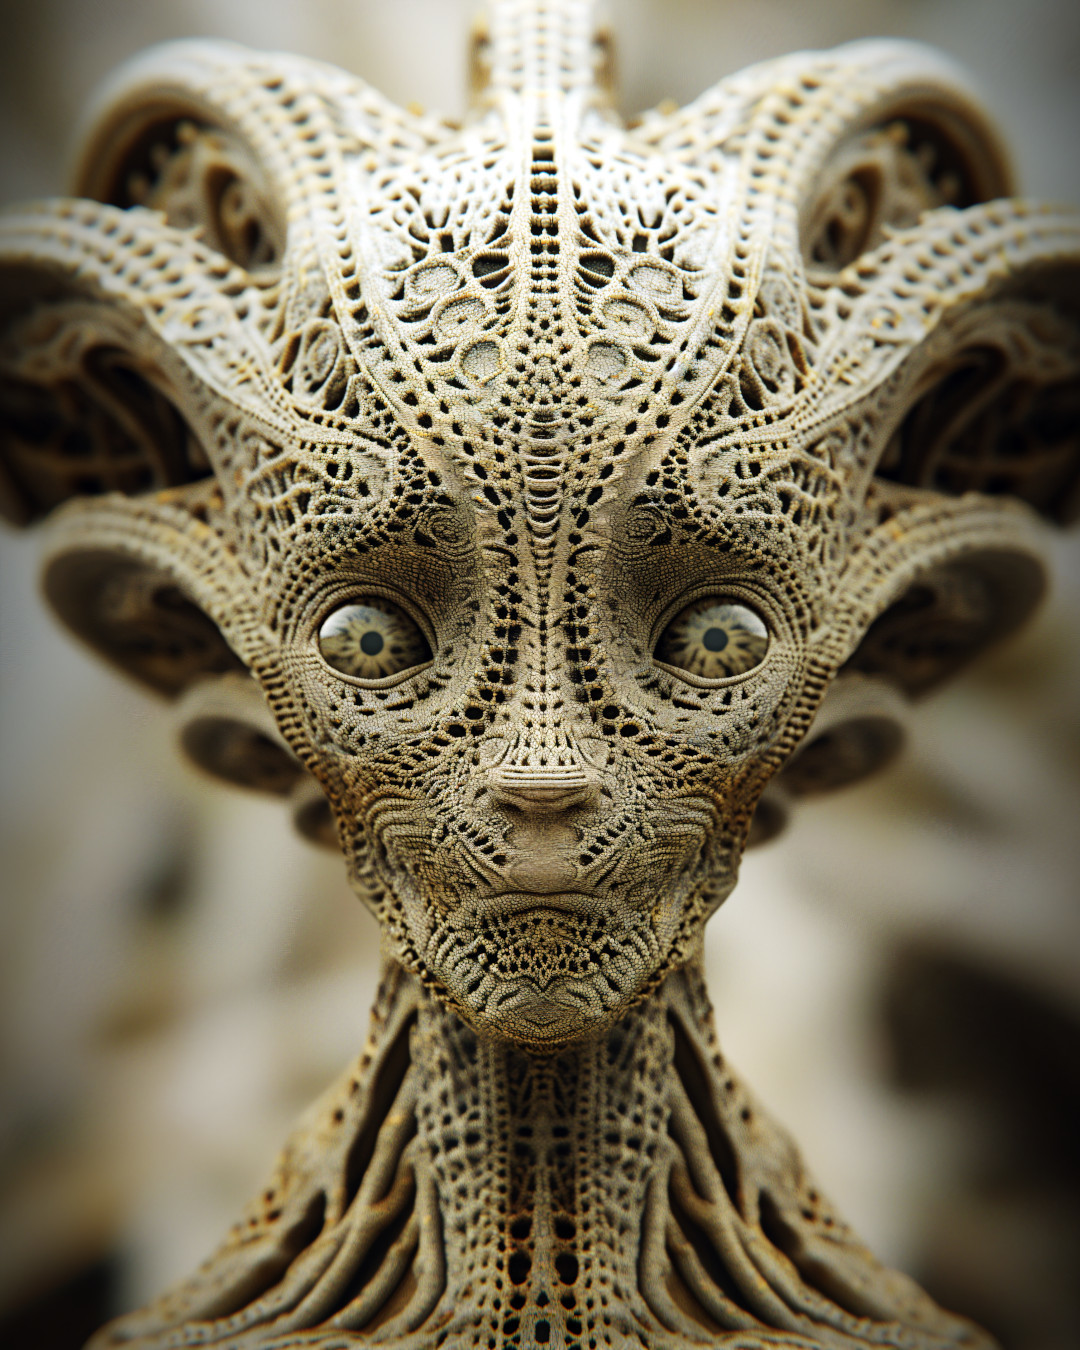 Detailed alien face, intricate patterns on its skin, portrait style